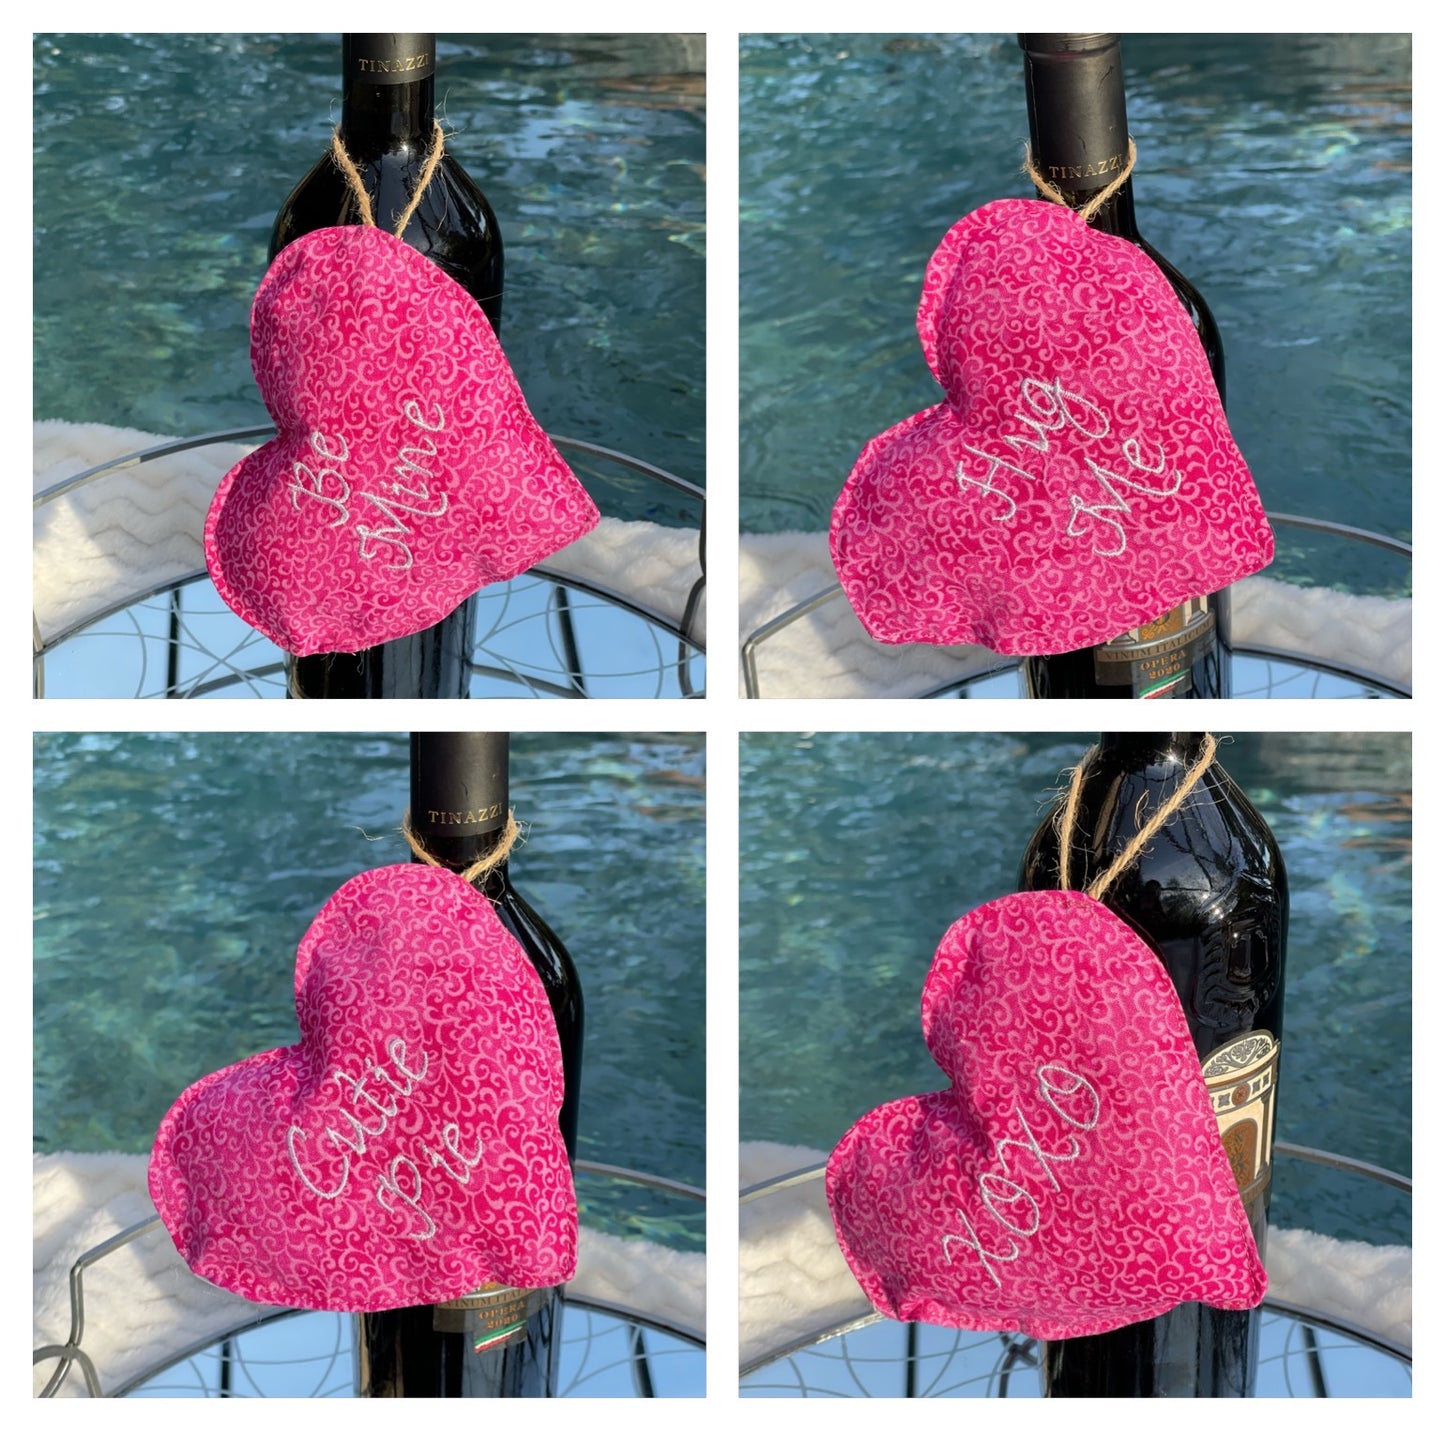 Puffy Valentine’s Hearts, Embroidered Candy Hearts Ornaments